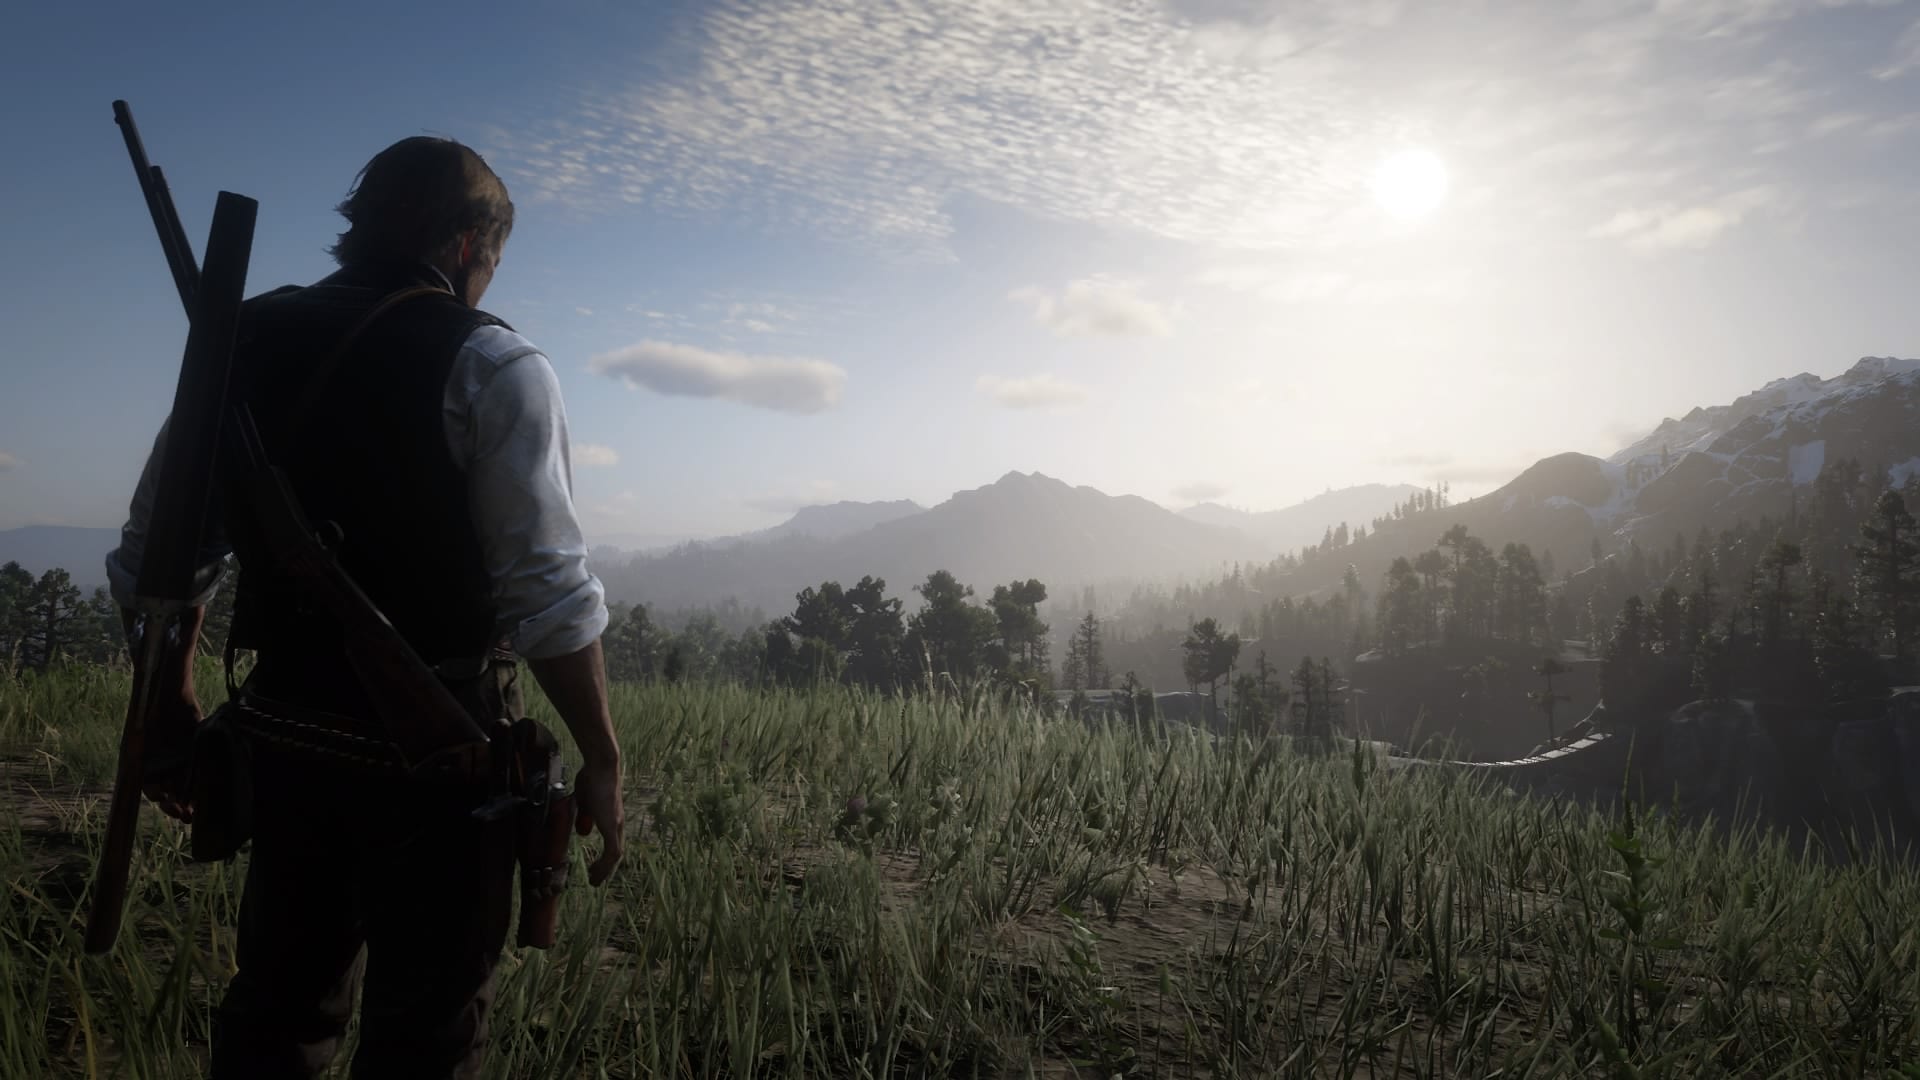 andrew finley share nudity in red dead redemption 2 photos